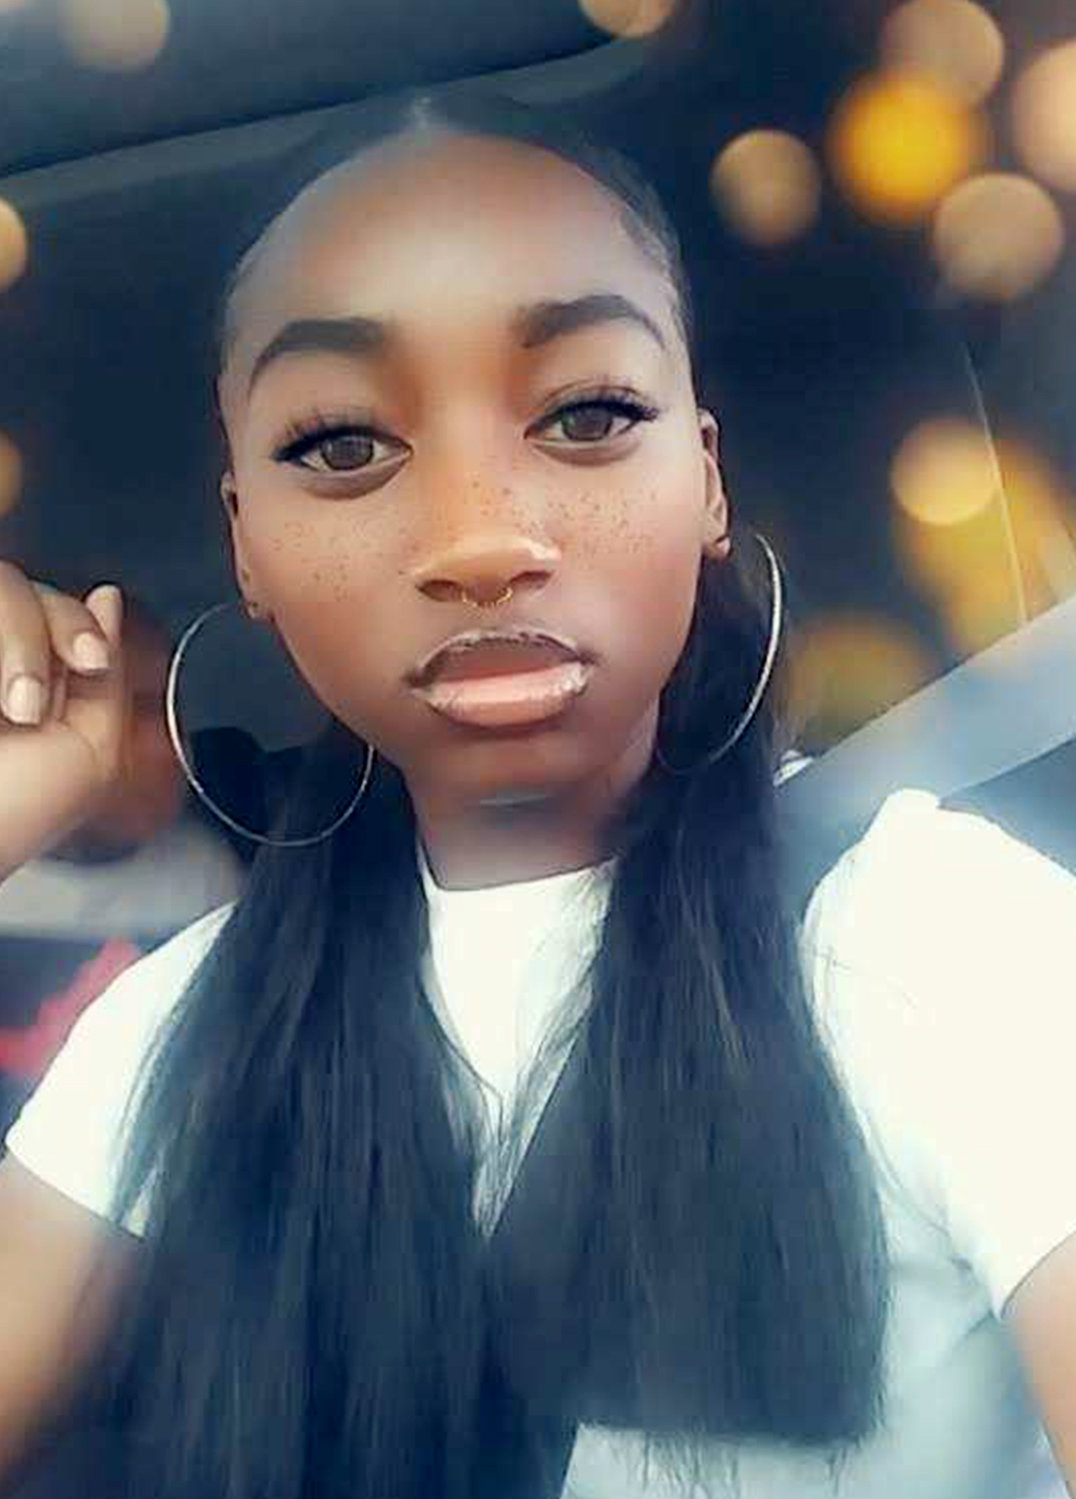 MISSING GIRL — Nyahna Bryant, age 16, has been missing from her home in New York Mills since Dec. 7. Anyone with information on her whereabouts is asked to call police at 315-736-6623.